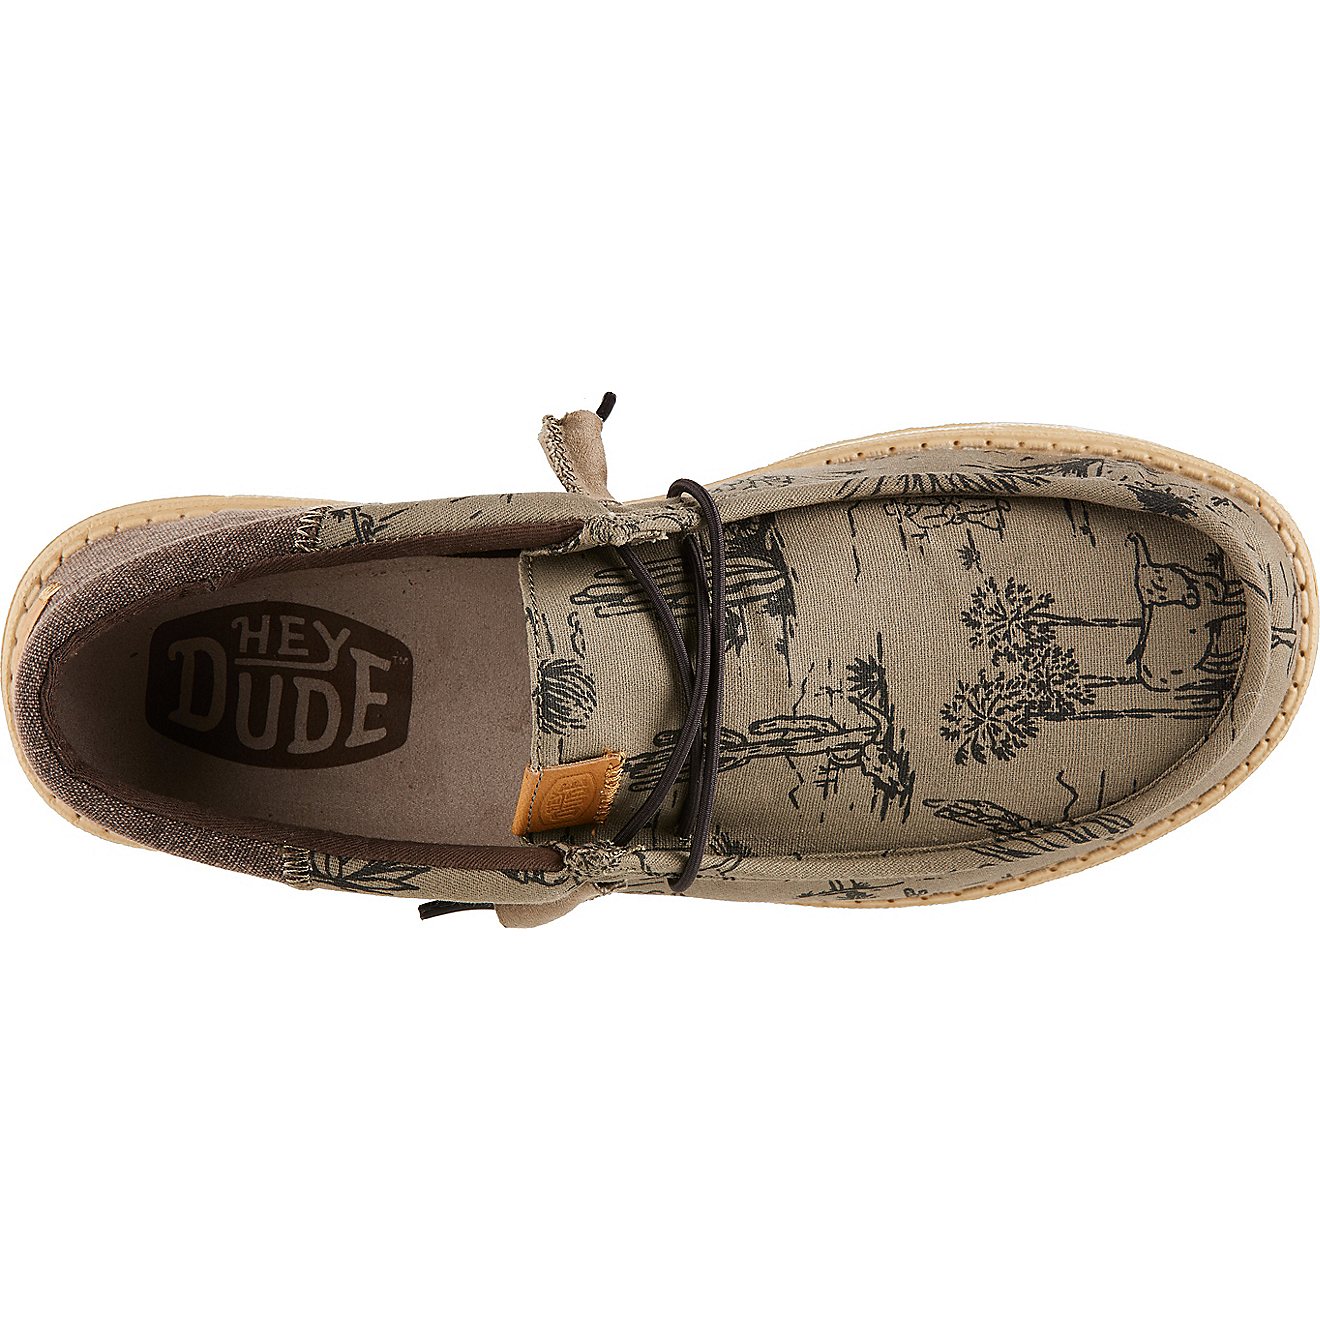 Hey Dude Men’s Wally Funk Desert Shoes                                                                                         - view number 7